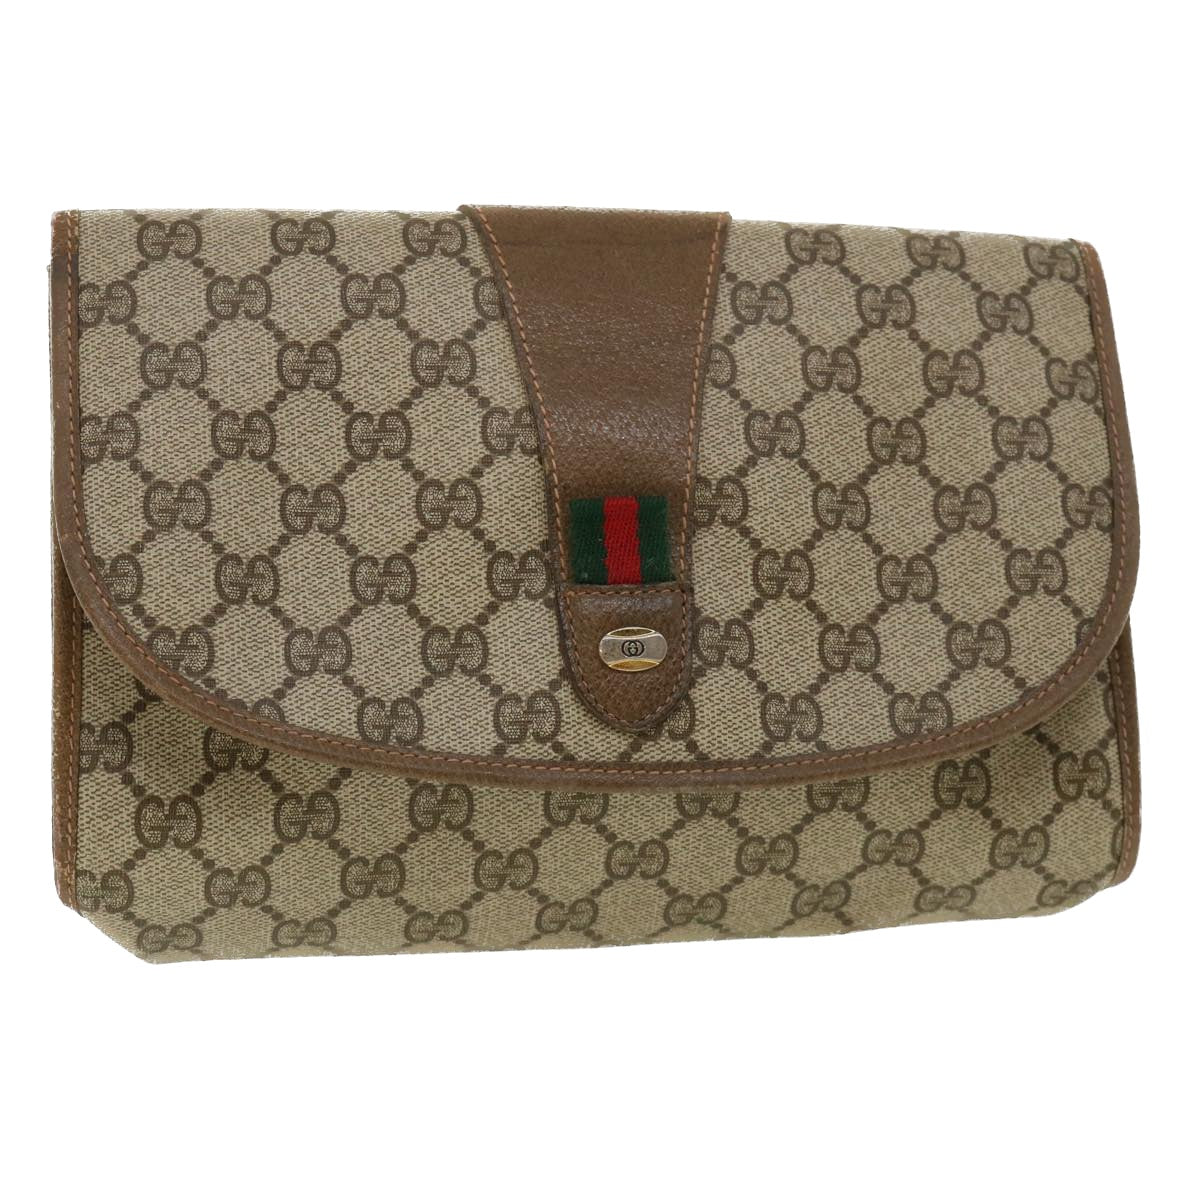 GUCCI GG Canvas Web Sherry Line Clutch Bag Beige Red Green 8901030 Auth ny174